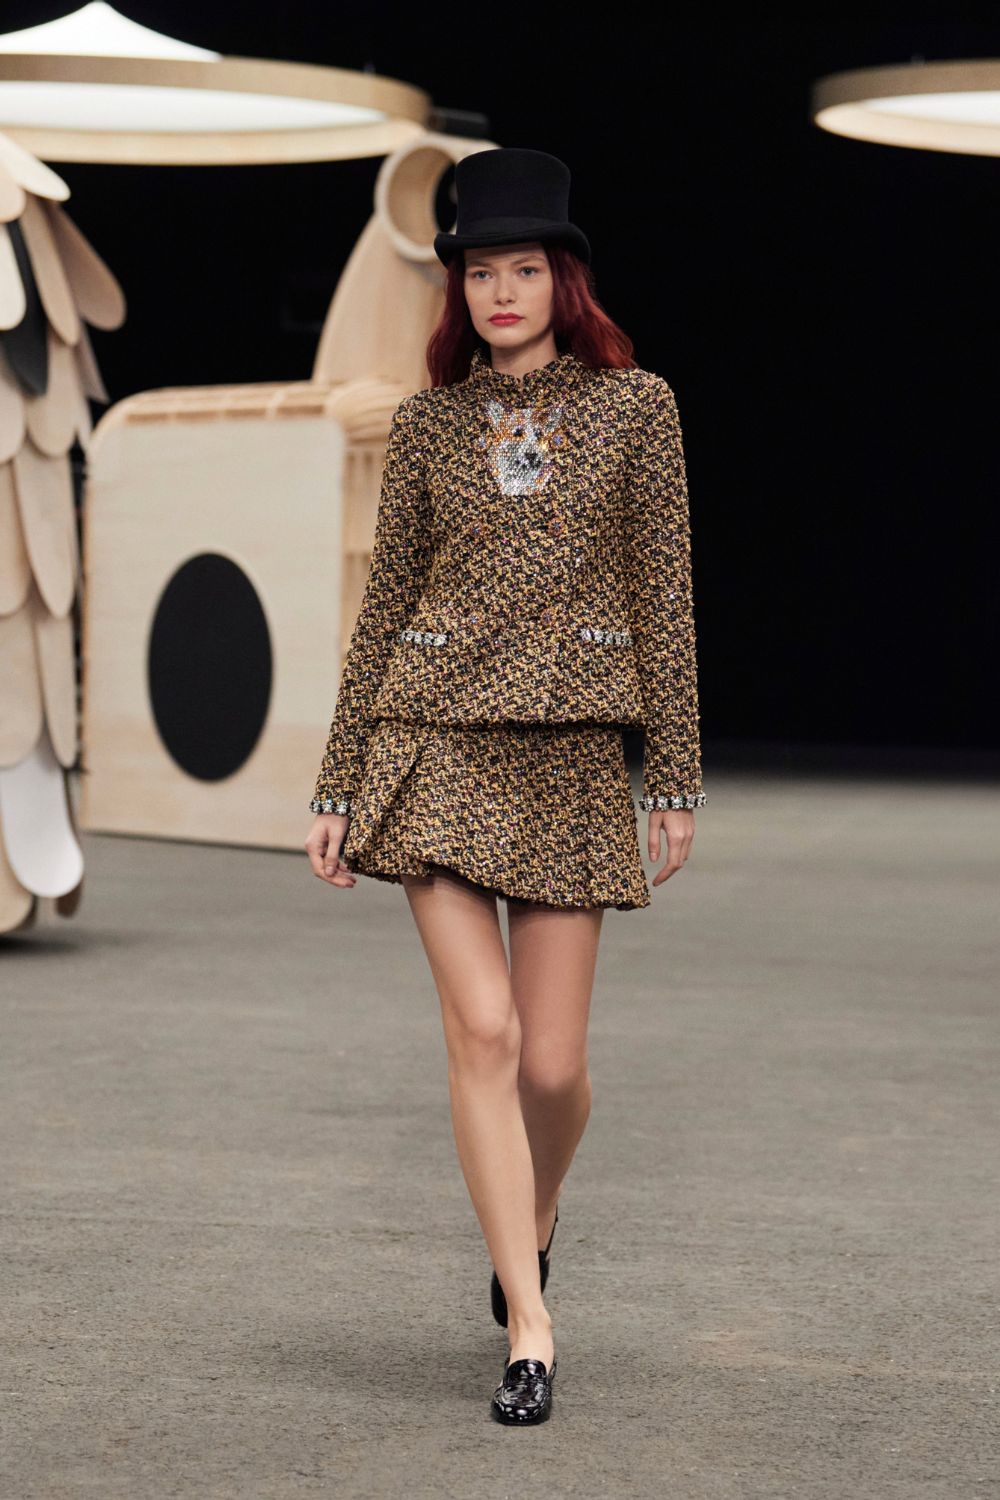 In the Chanel haute couture collection, there is a parade of